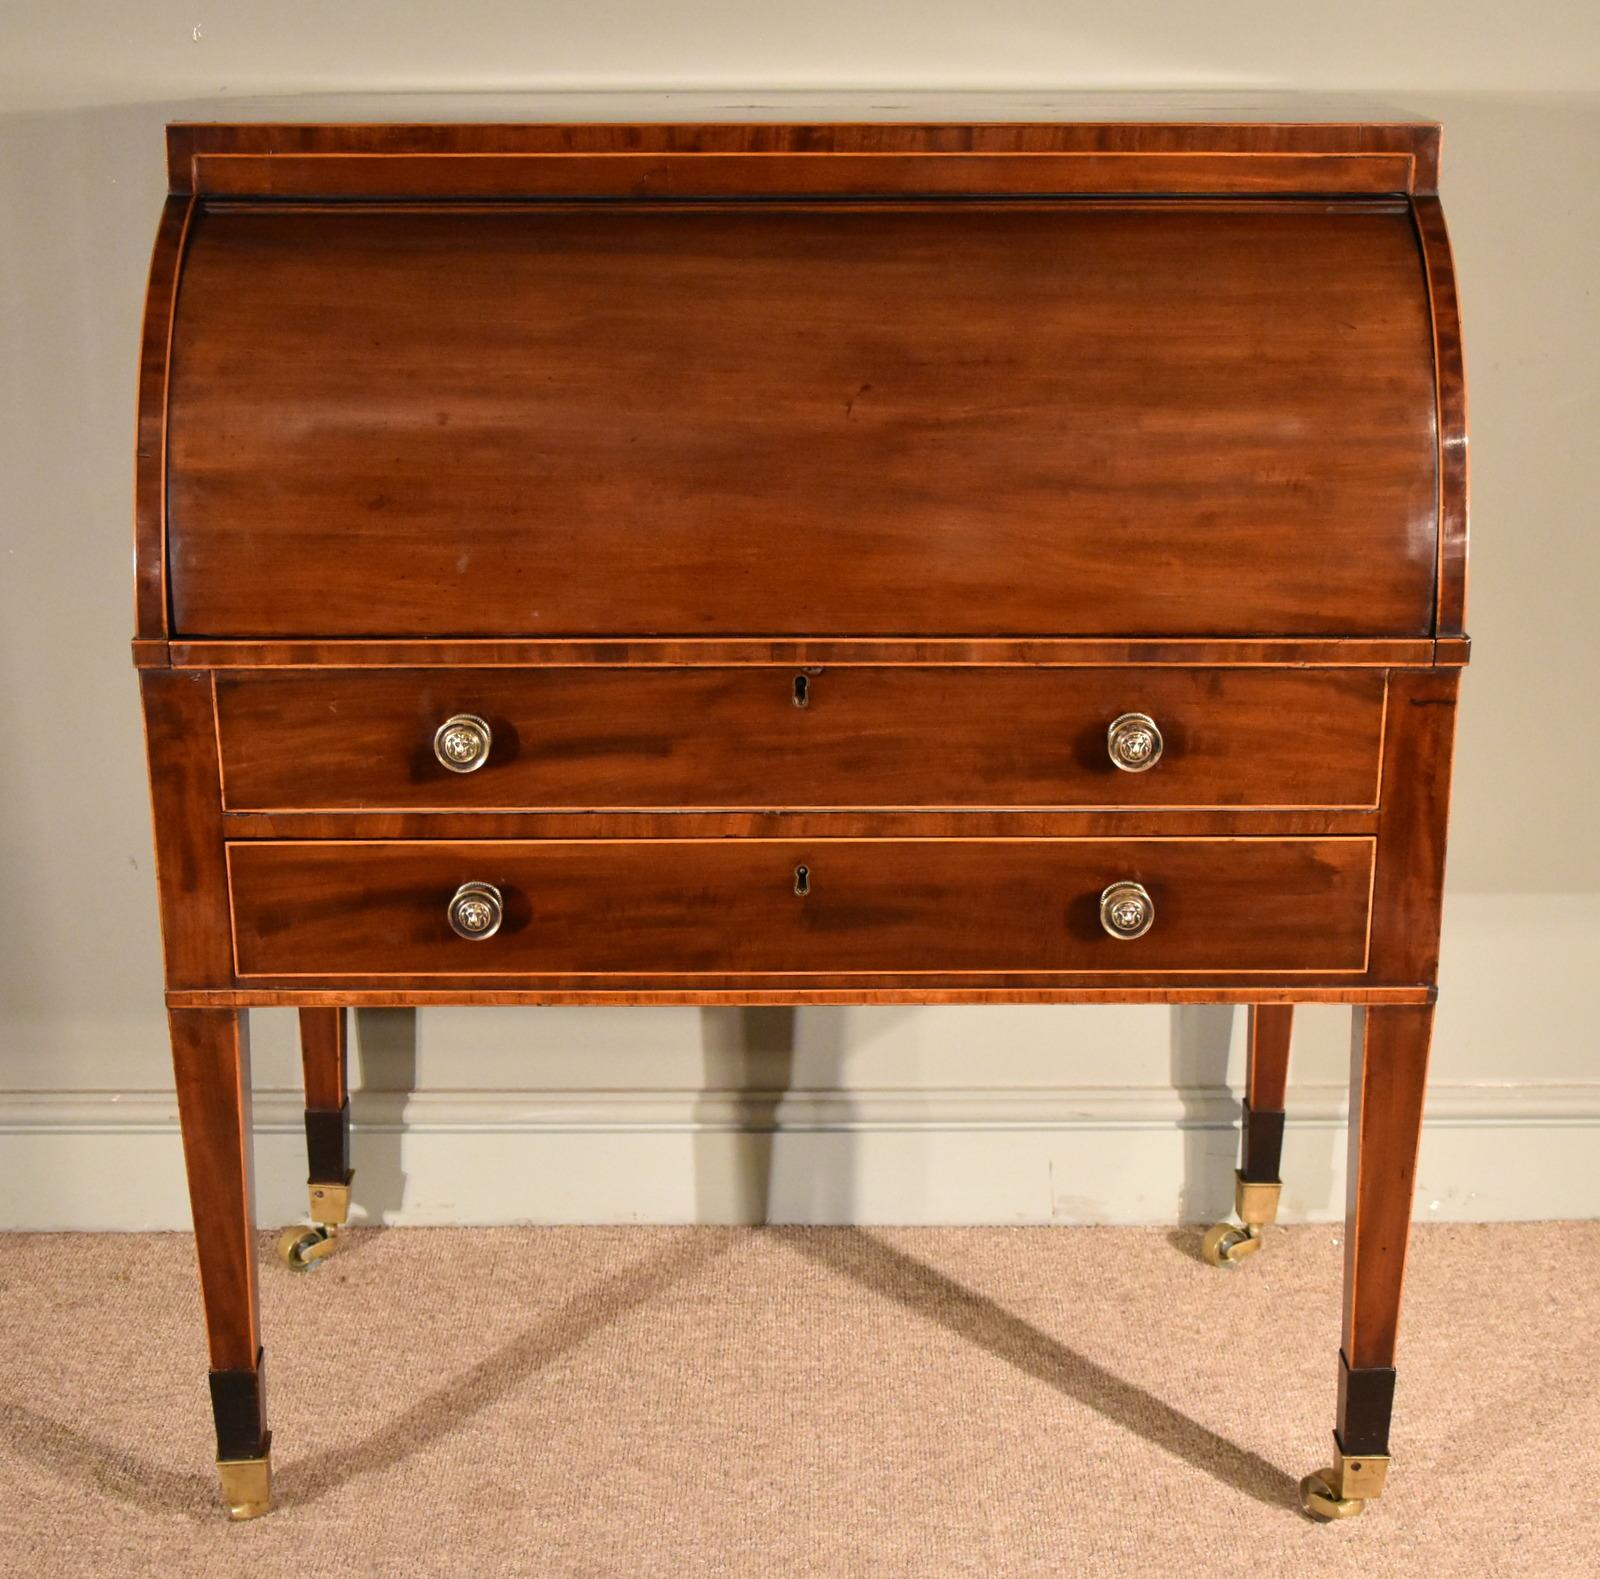 A superb quality late 18th century Sheraton period mahogany and boxwood strong cylinder desk with a fine burr yew interior.

Dimensions:
Height 42” (107cm)
Width 36